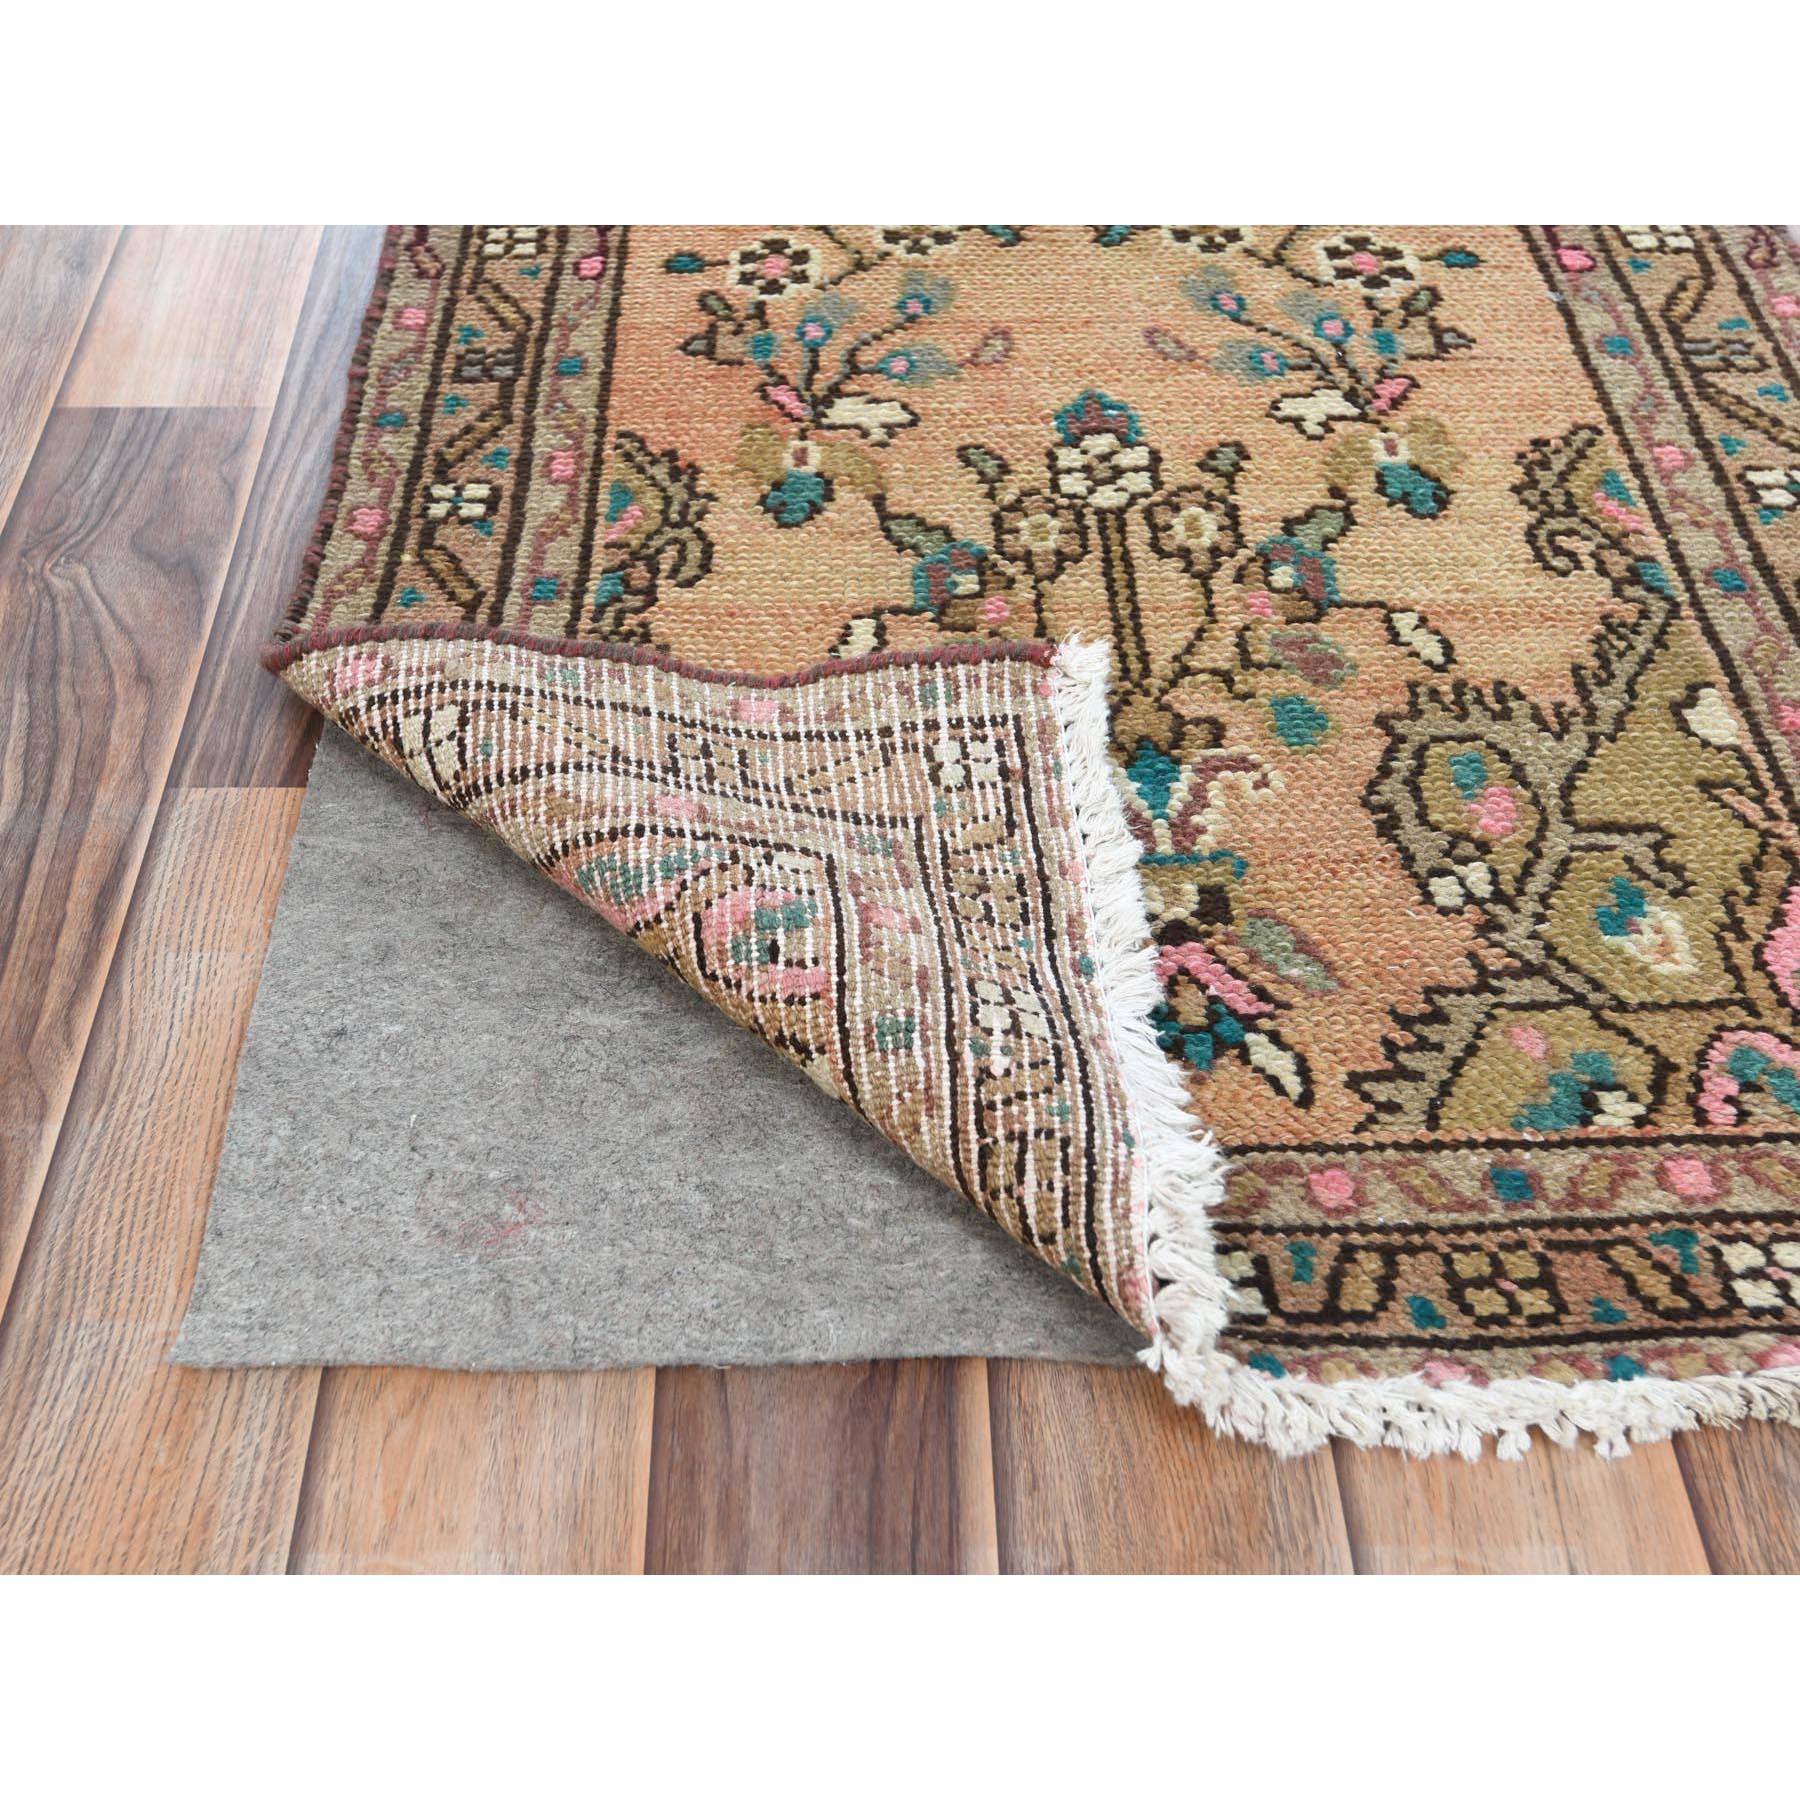 Medieval Apricot Color Shades Vintage Persian Bibikabad Hand Knotted Worn Wool Rug For Sale